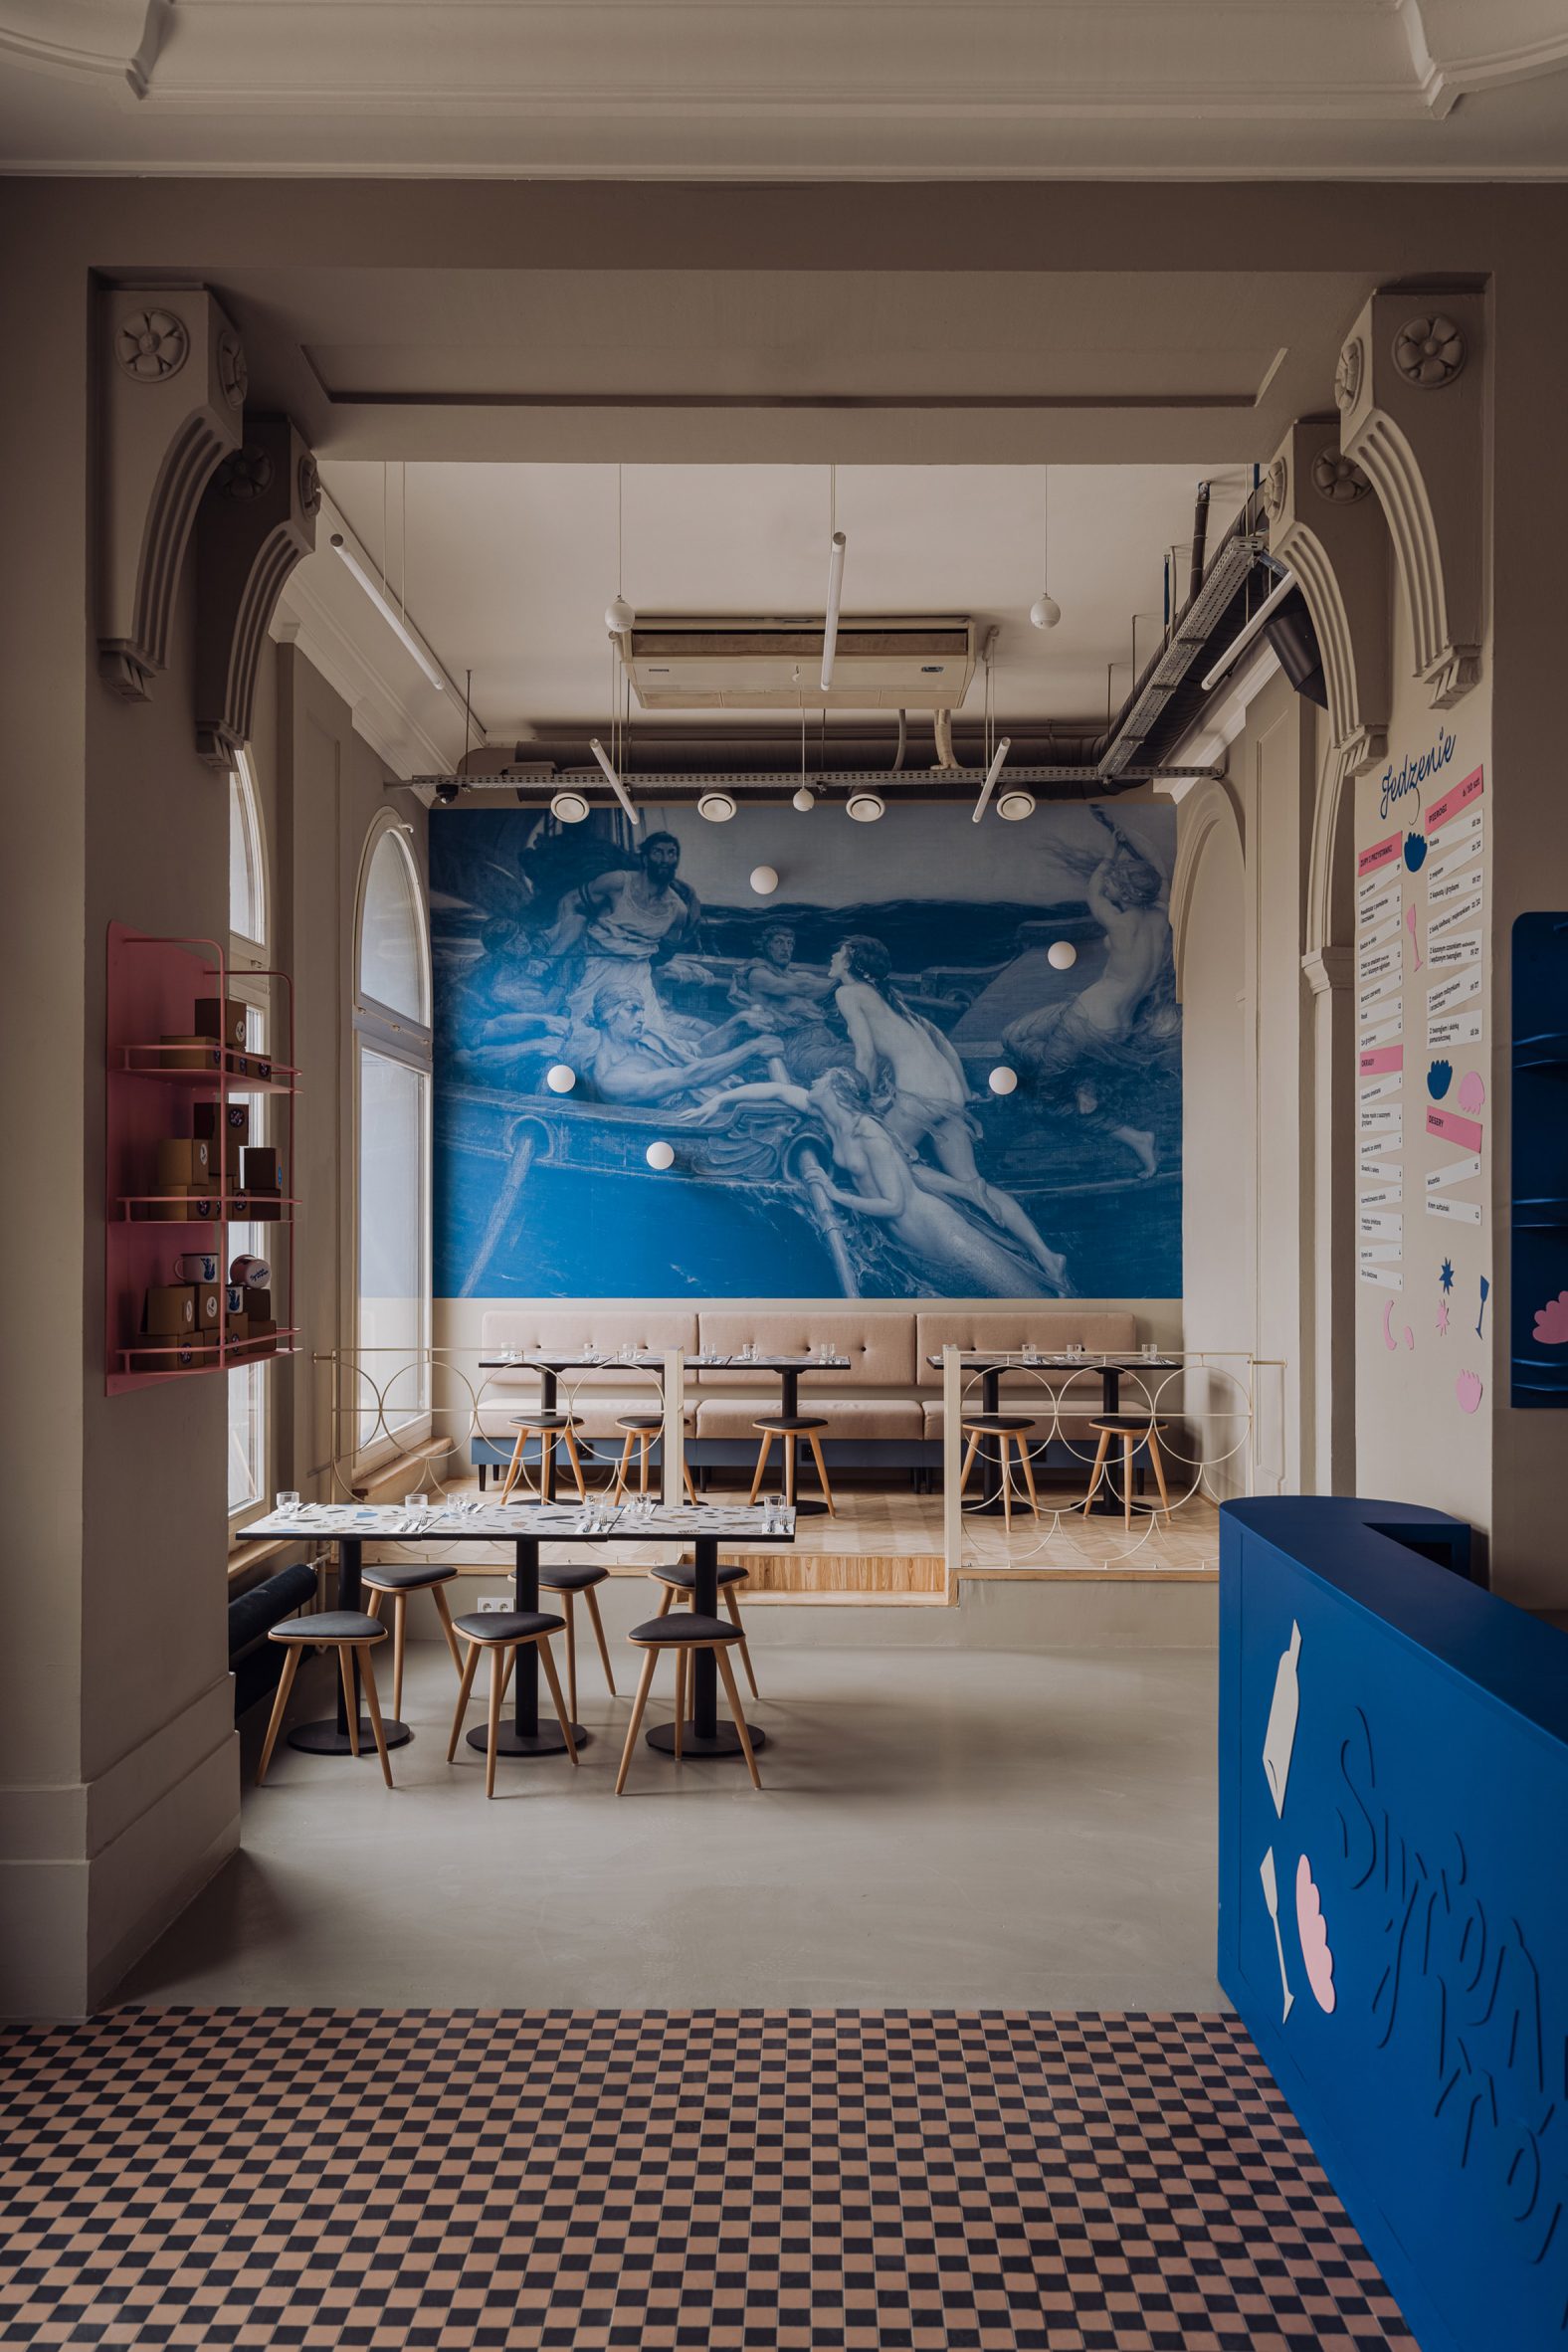 Seating area of pierogi restaurant in Warsaw by Projekt Praga with checked floor and blue details